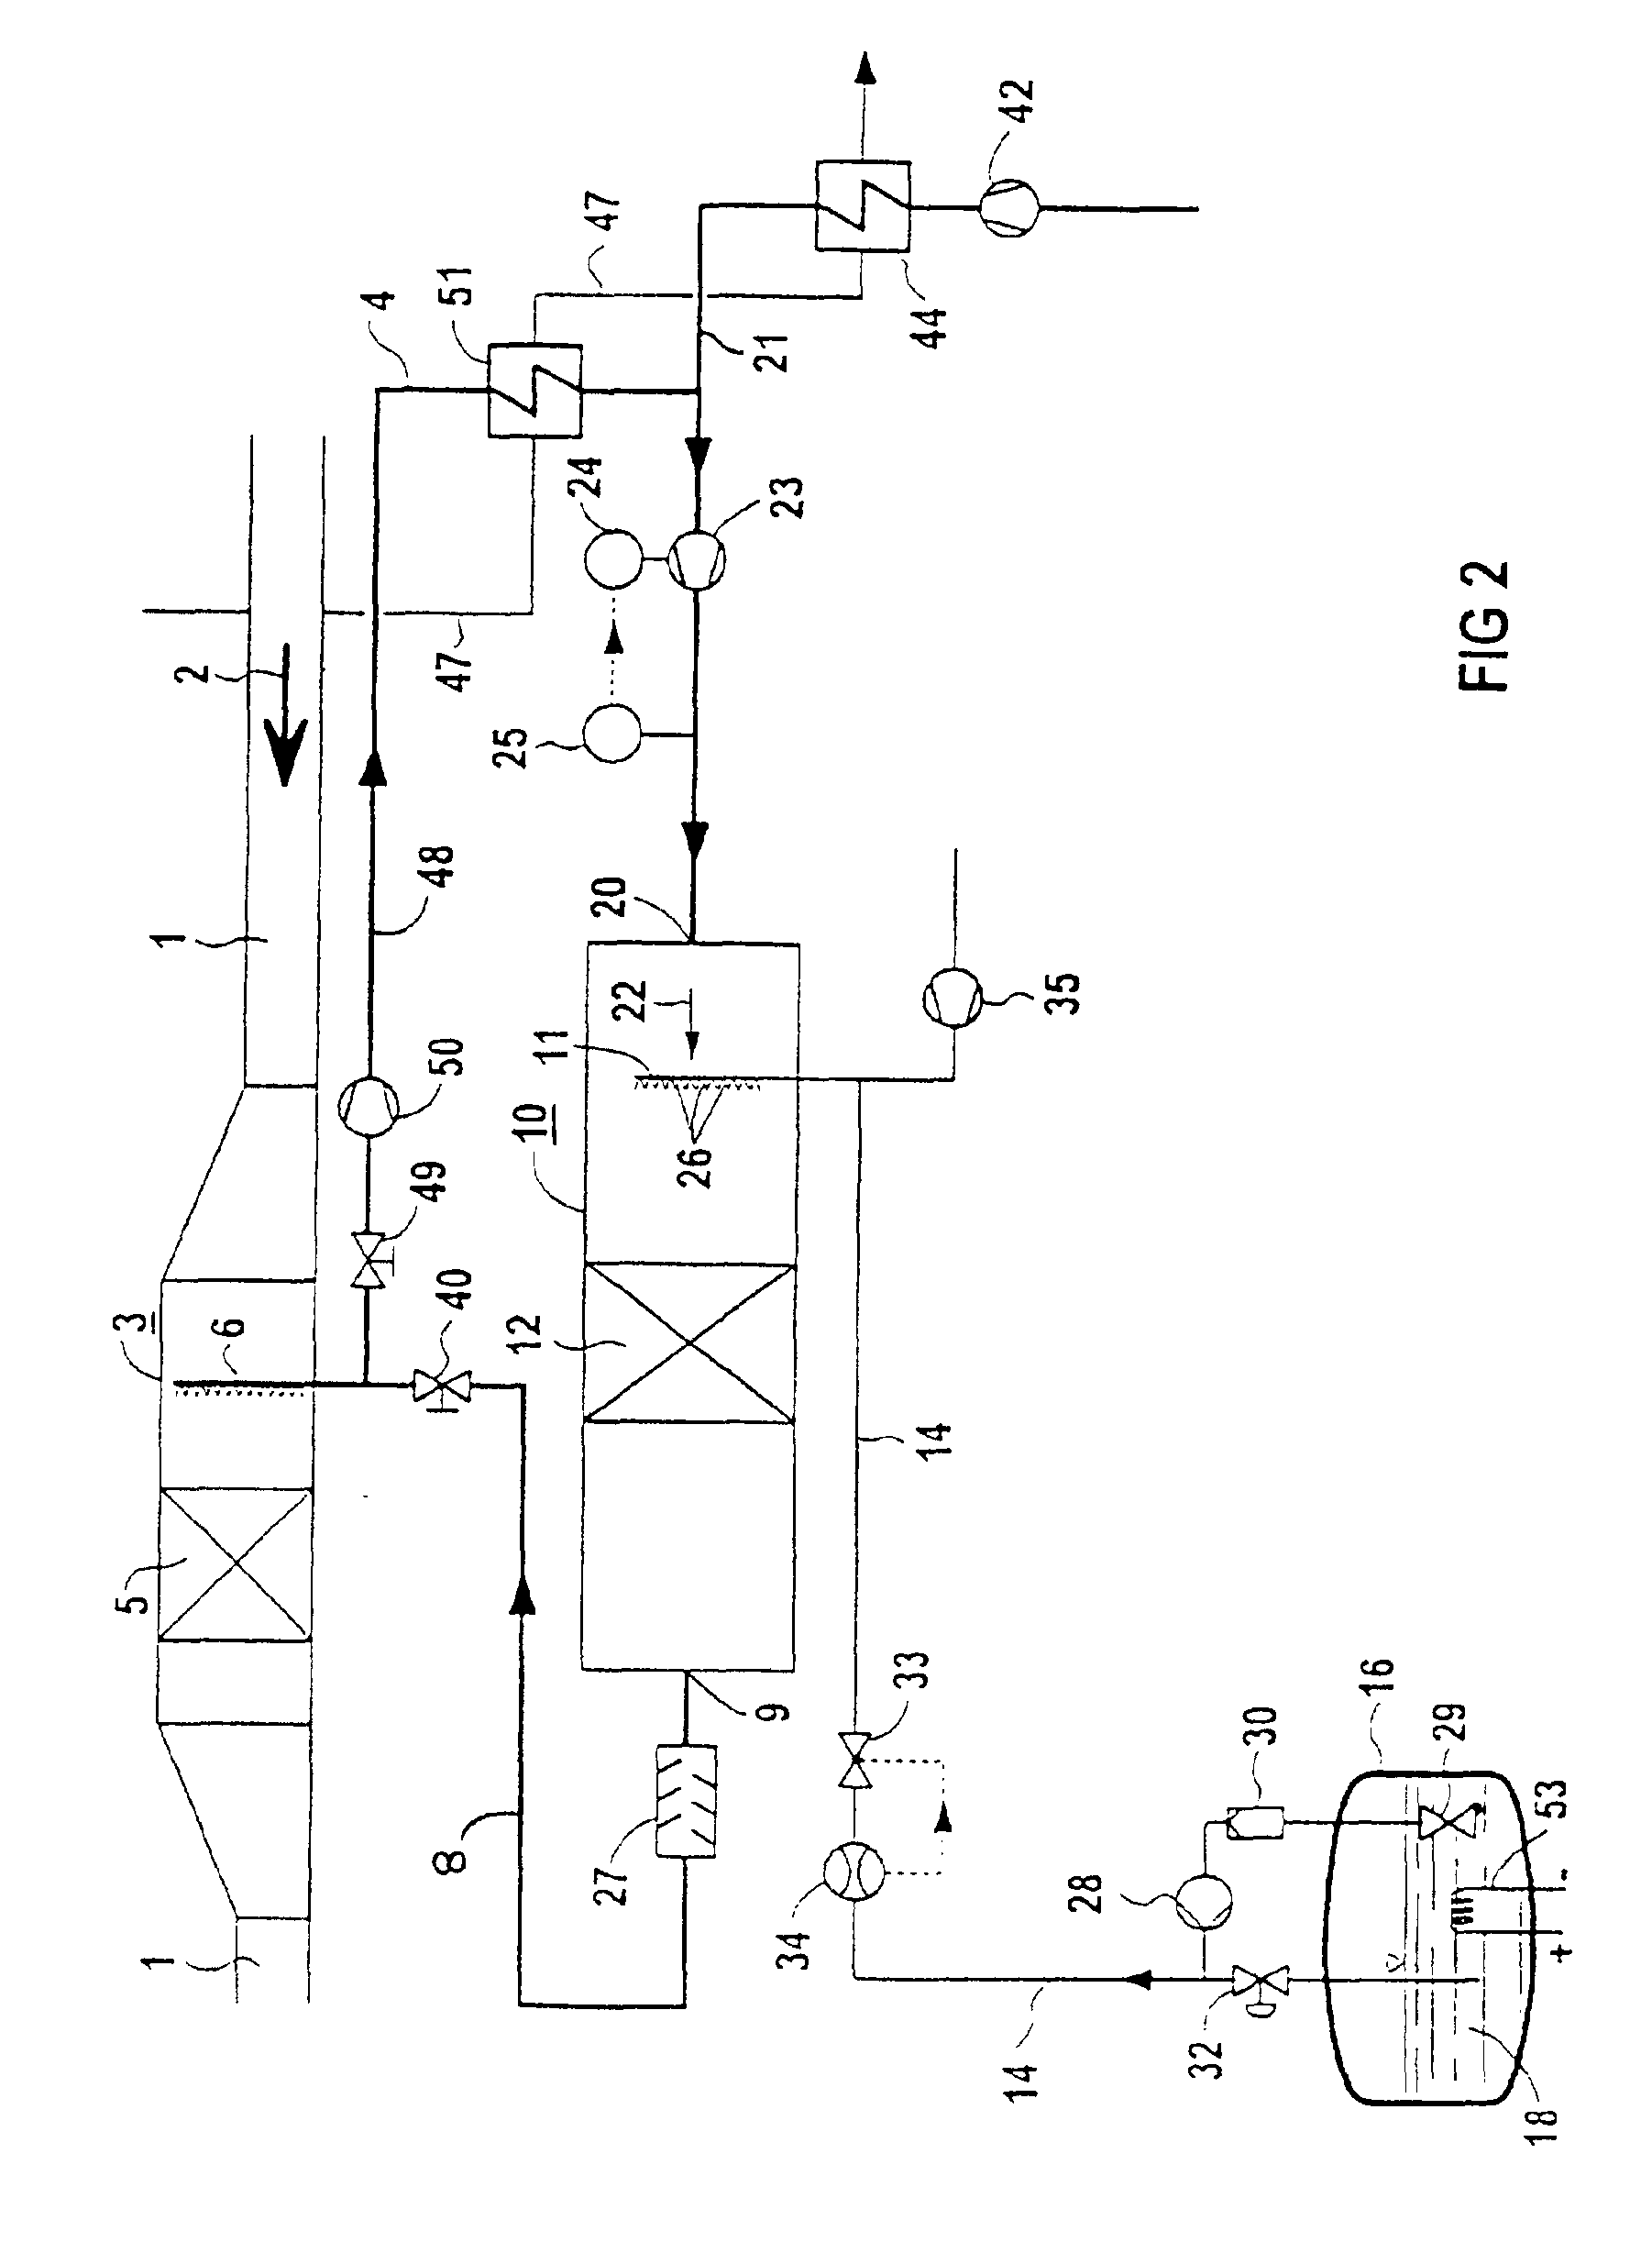 Process and device for the selective catalytic reduction of nitrogen oxides in an oxygen-containing gaseous medium